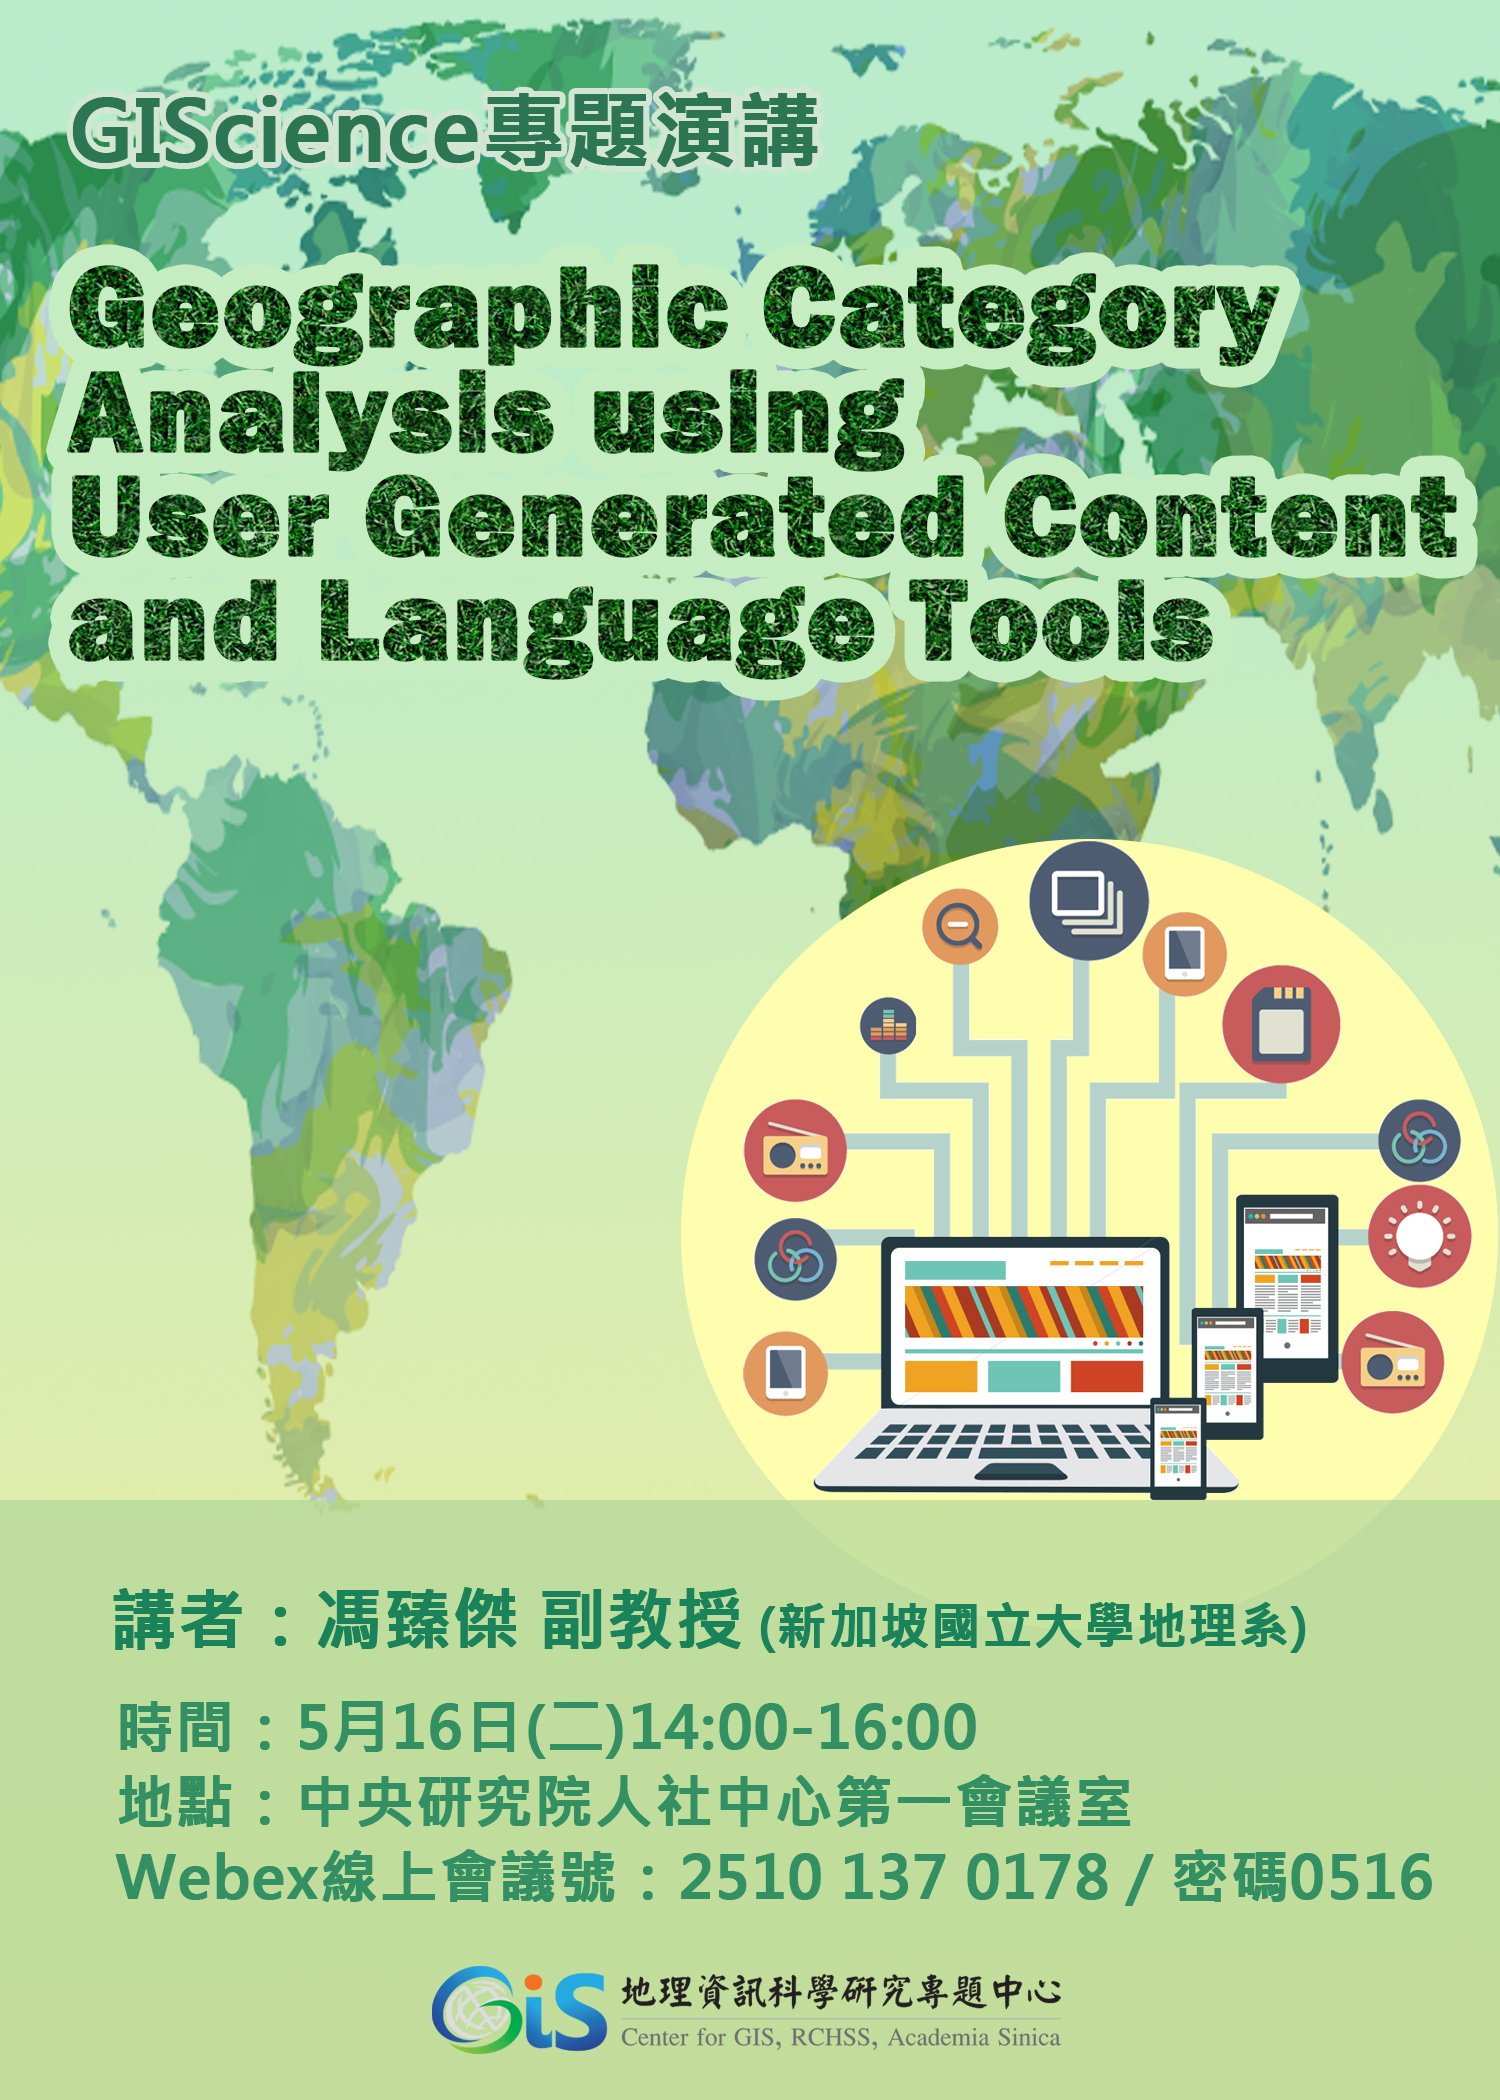 【GIScience 專題演講】Geographic Category Analysis using User Generated Content and Language Tools